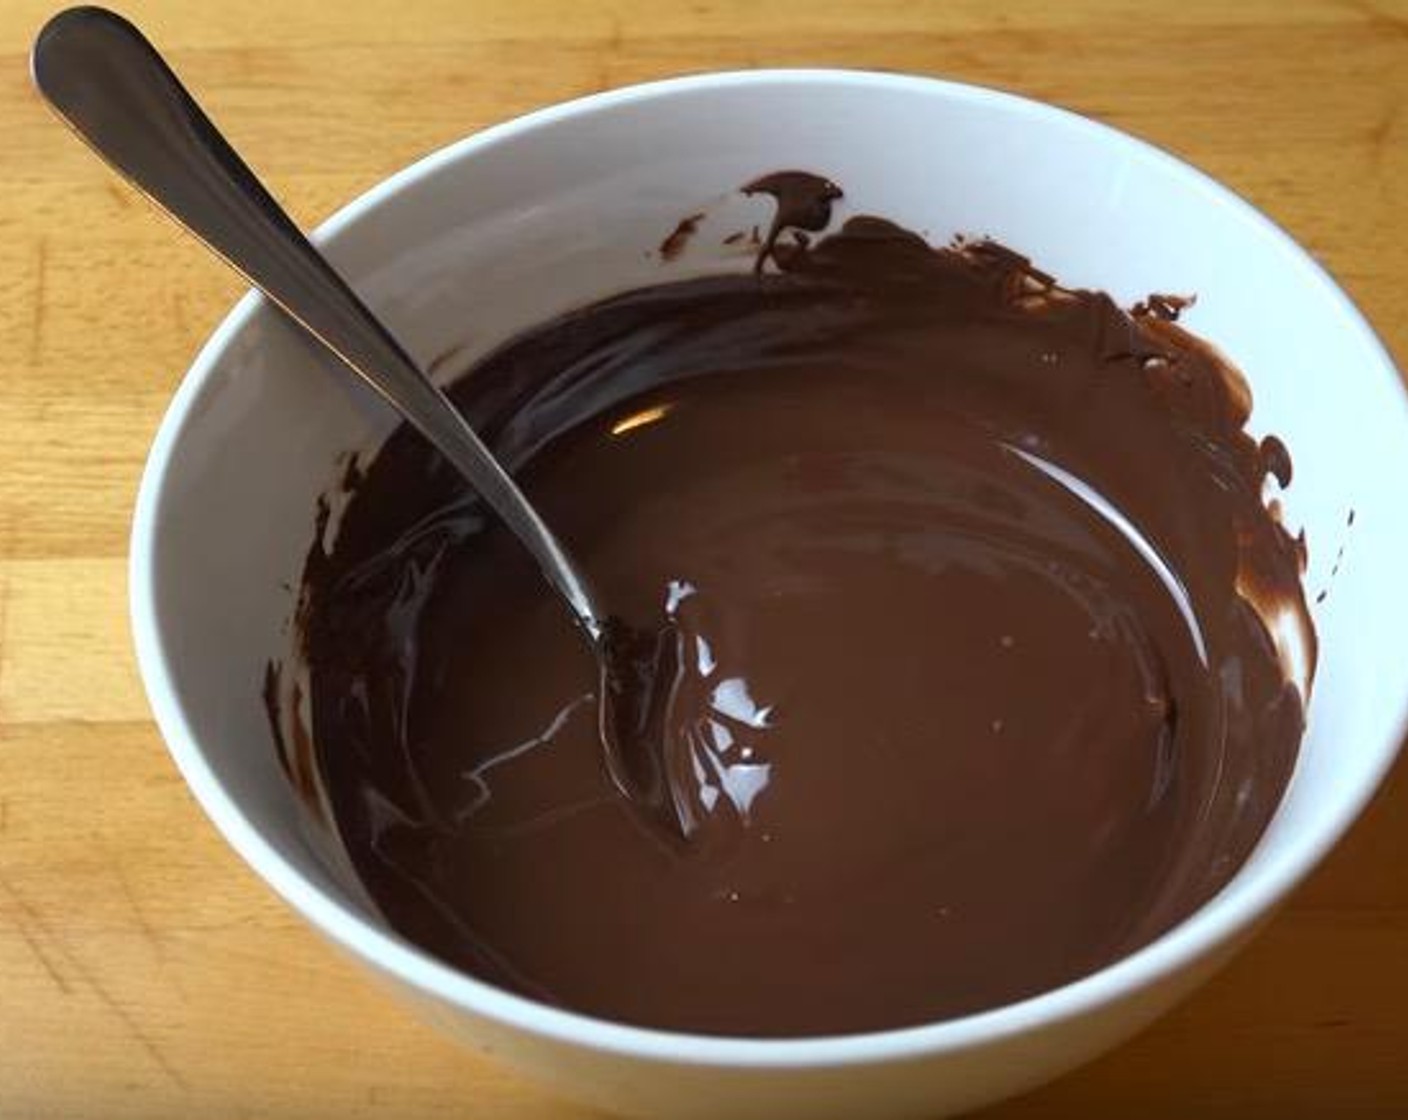 step 2 Place Semi-Sweet Dark Chocolate (1 3/4 cups) in a microwave-safe dish and heat for 30 seconds. Stir and repeat until the chocolate is melted and smooth. Set aside to cool.